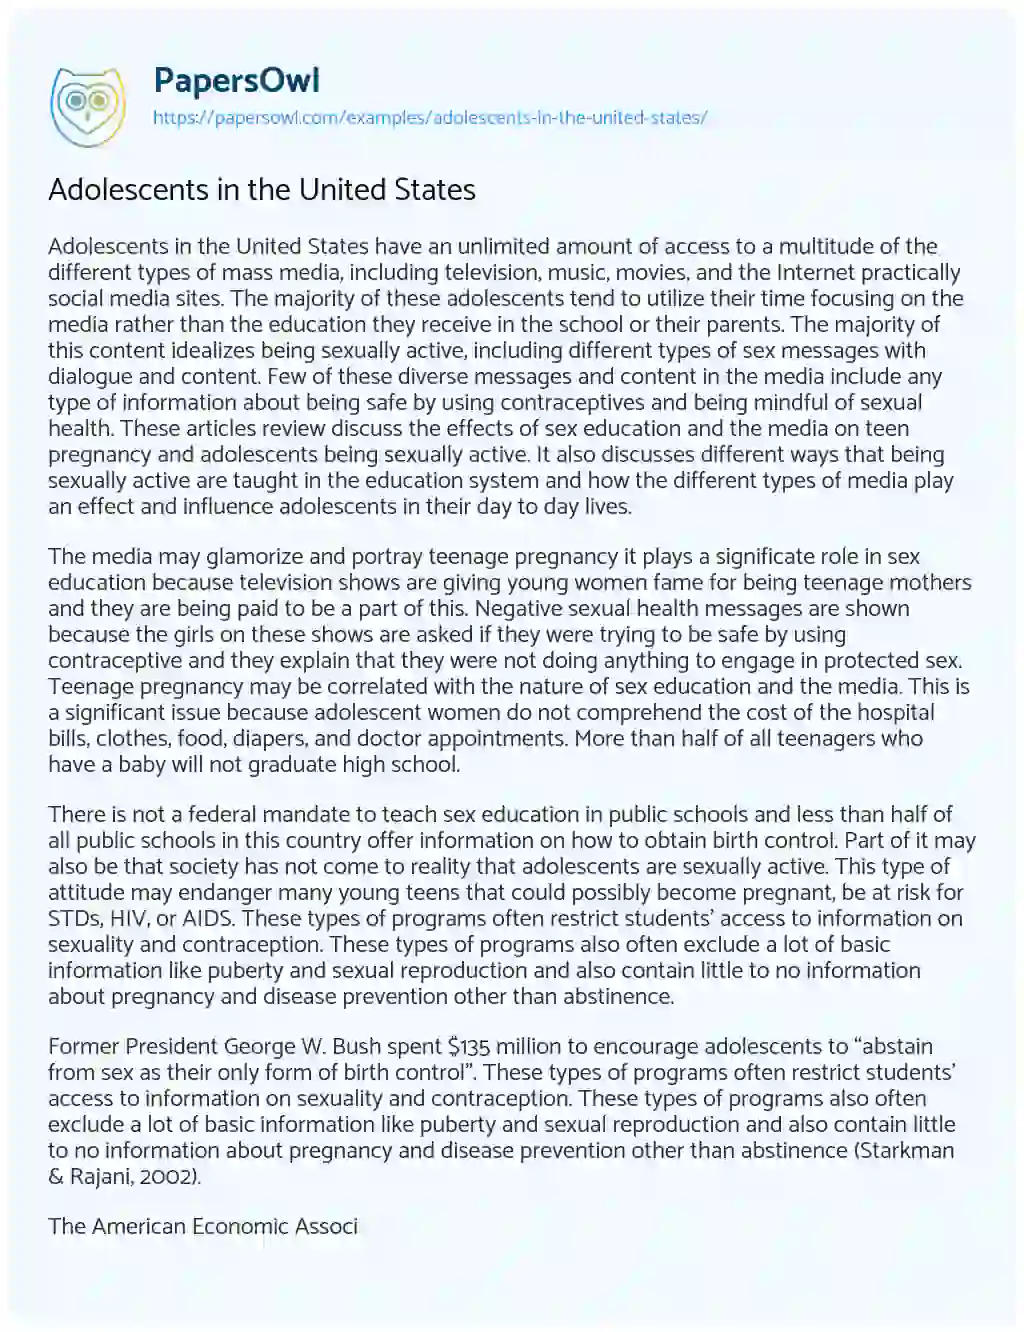 Adolescents in the United States essay